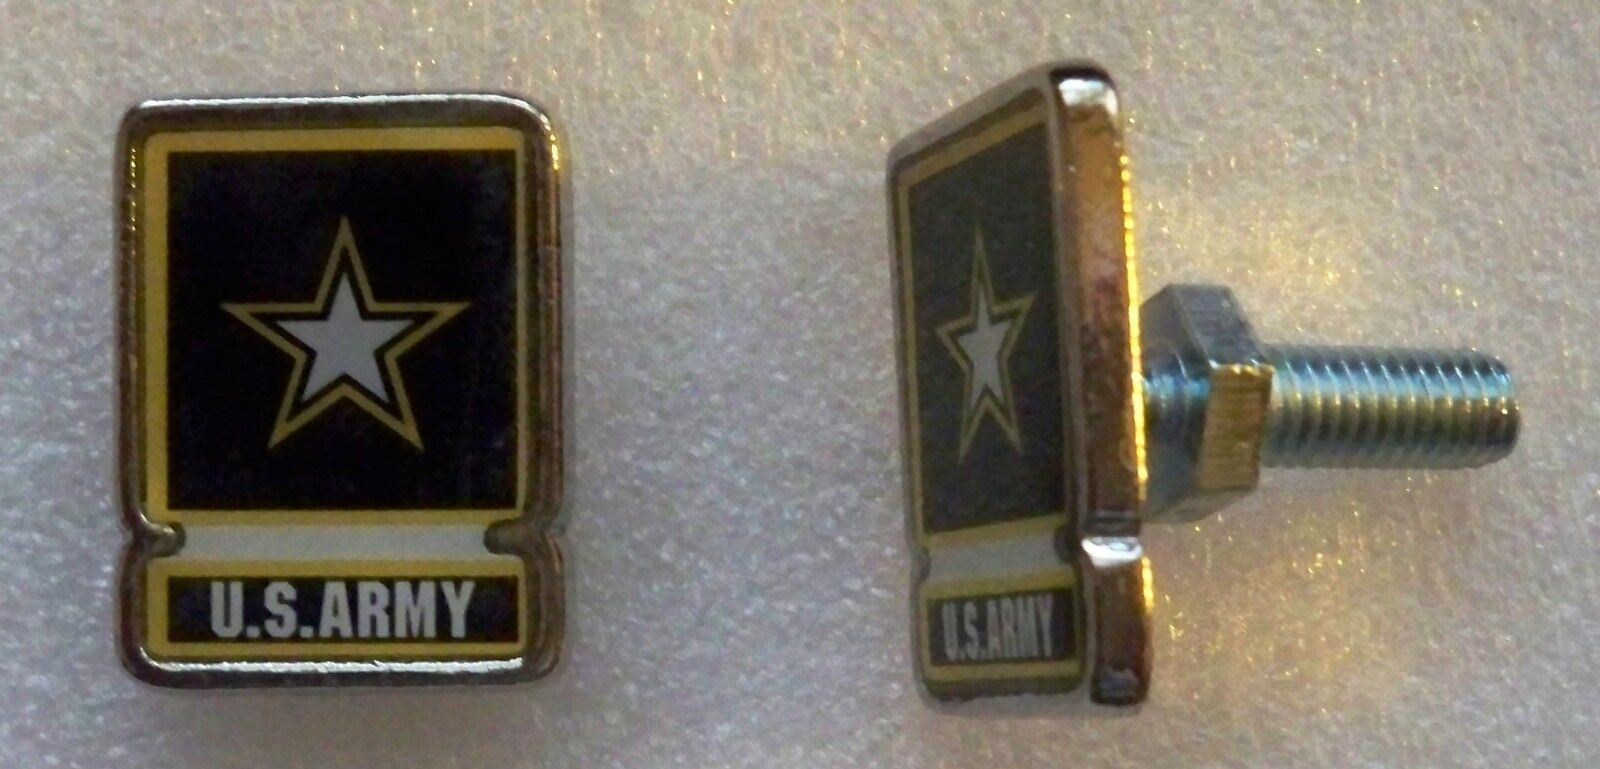 US Army star logo license plate bolts, made in America